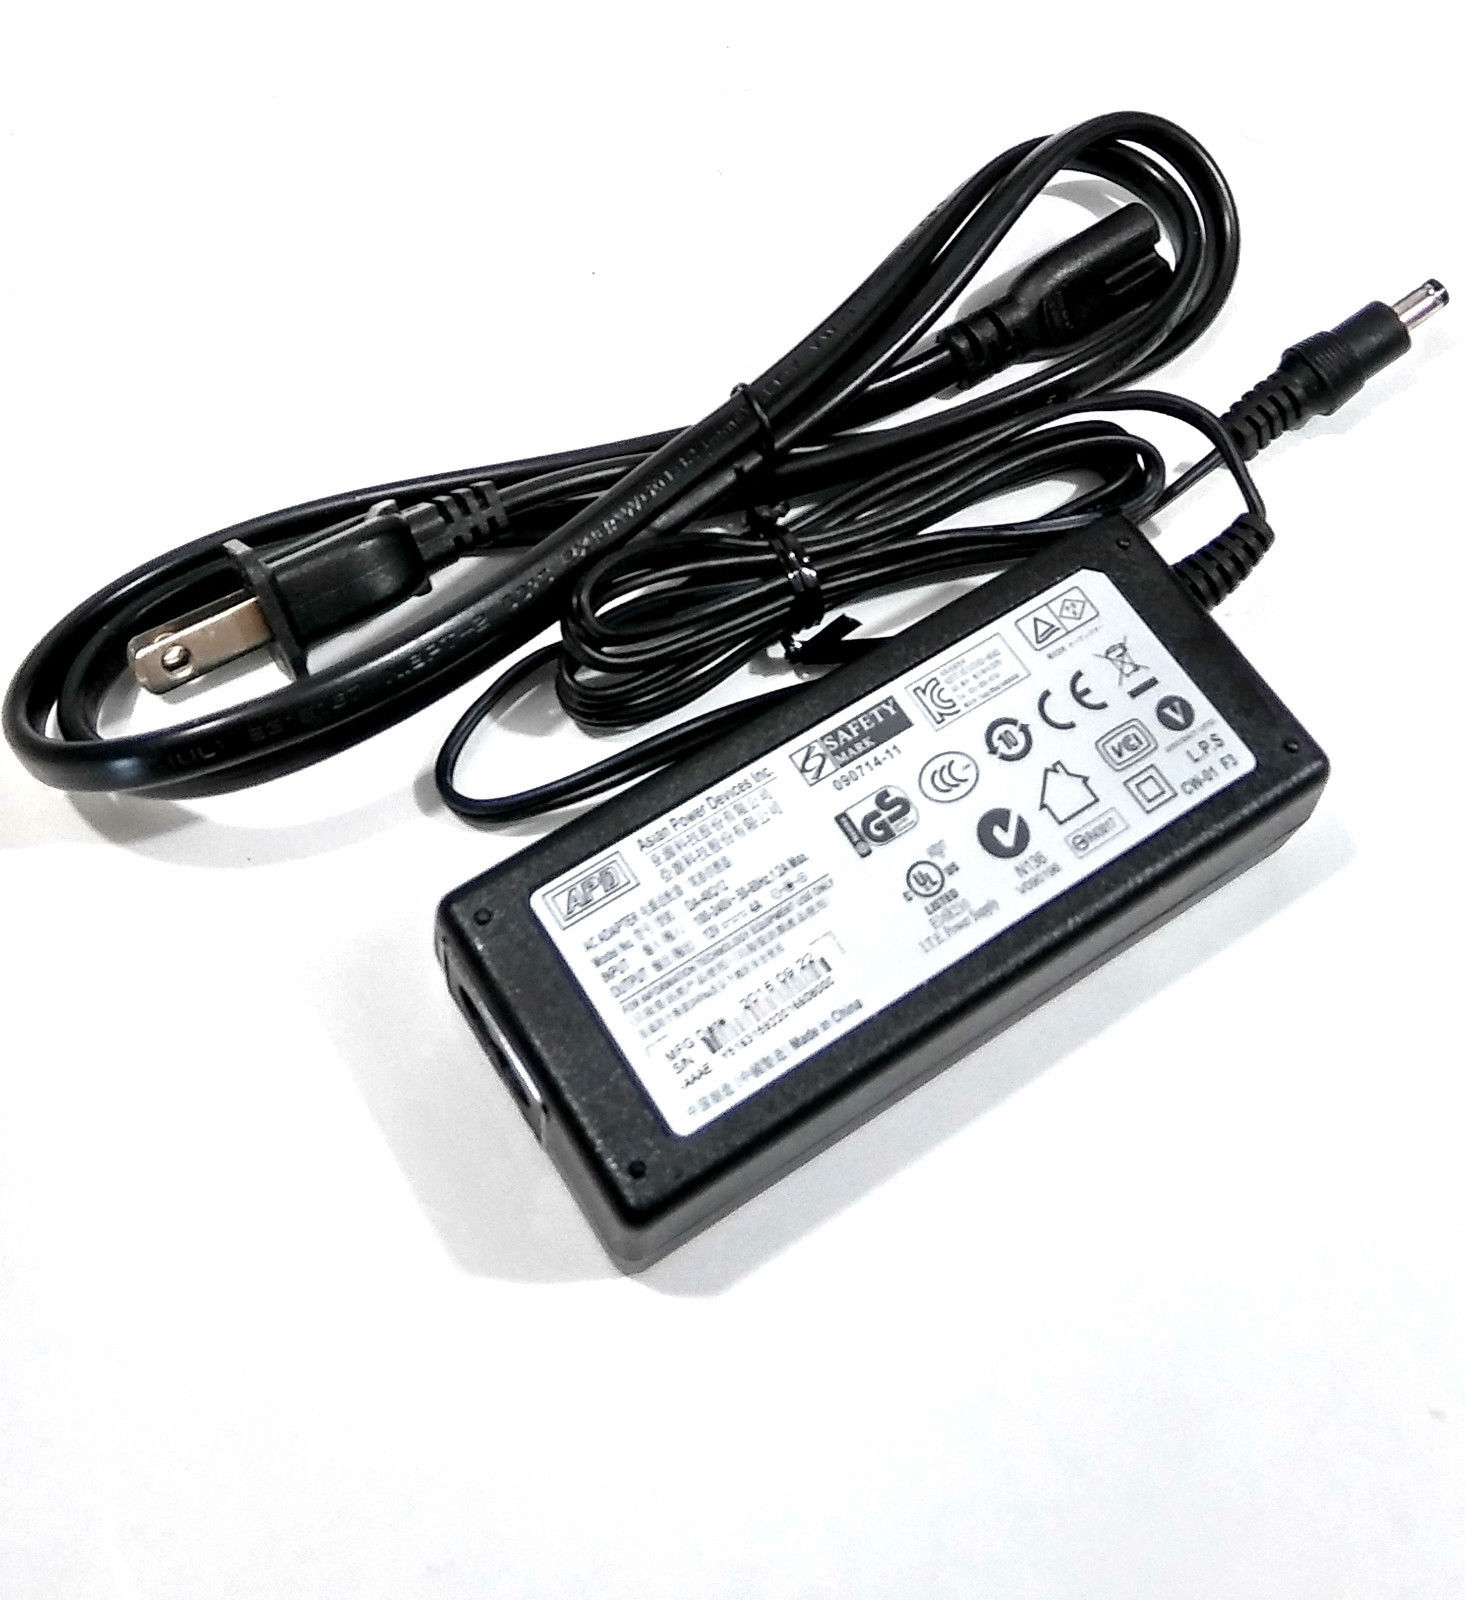 AC Adapter For APD DA-48Q12 Asian Power Devices 12V 4A Charger Supply + Cord